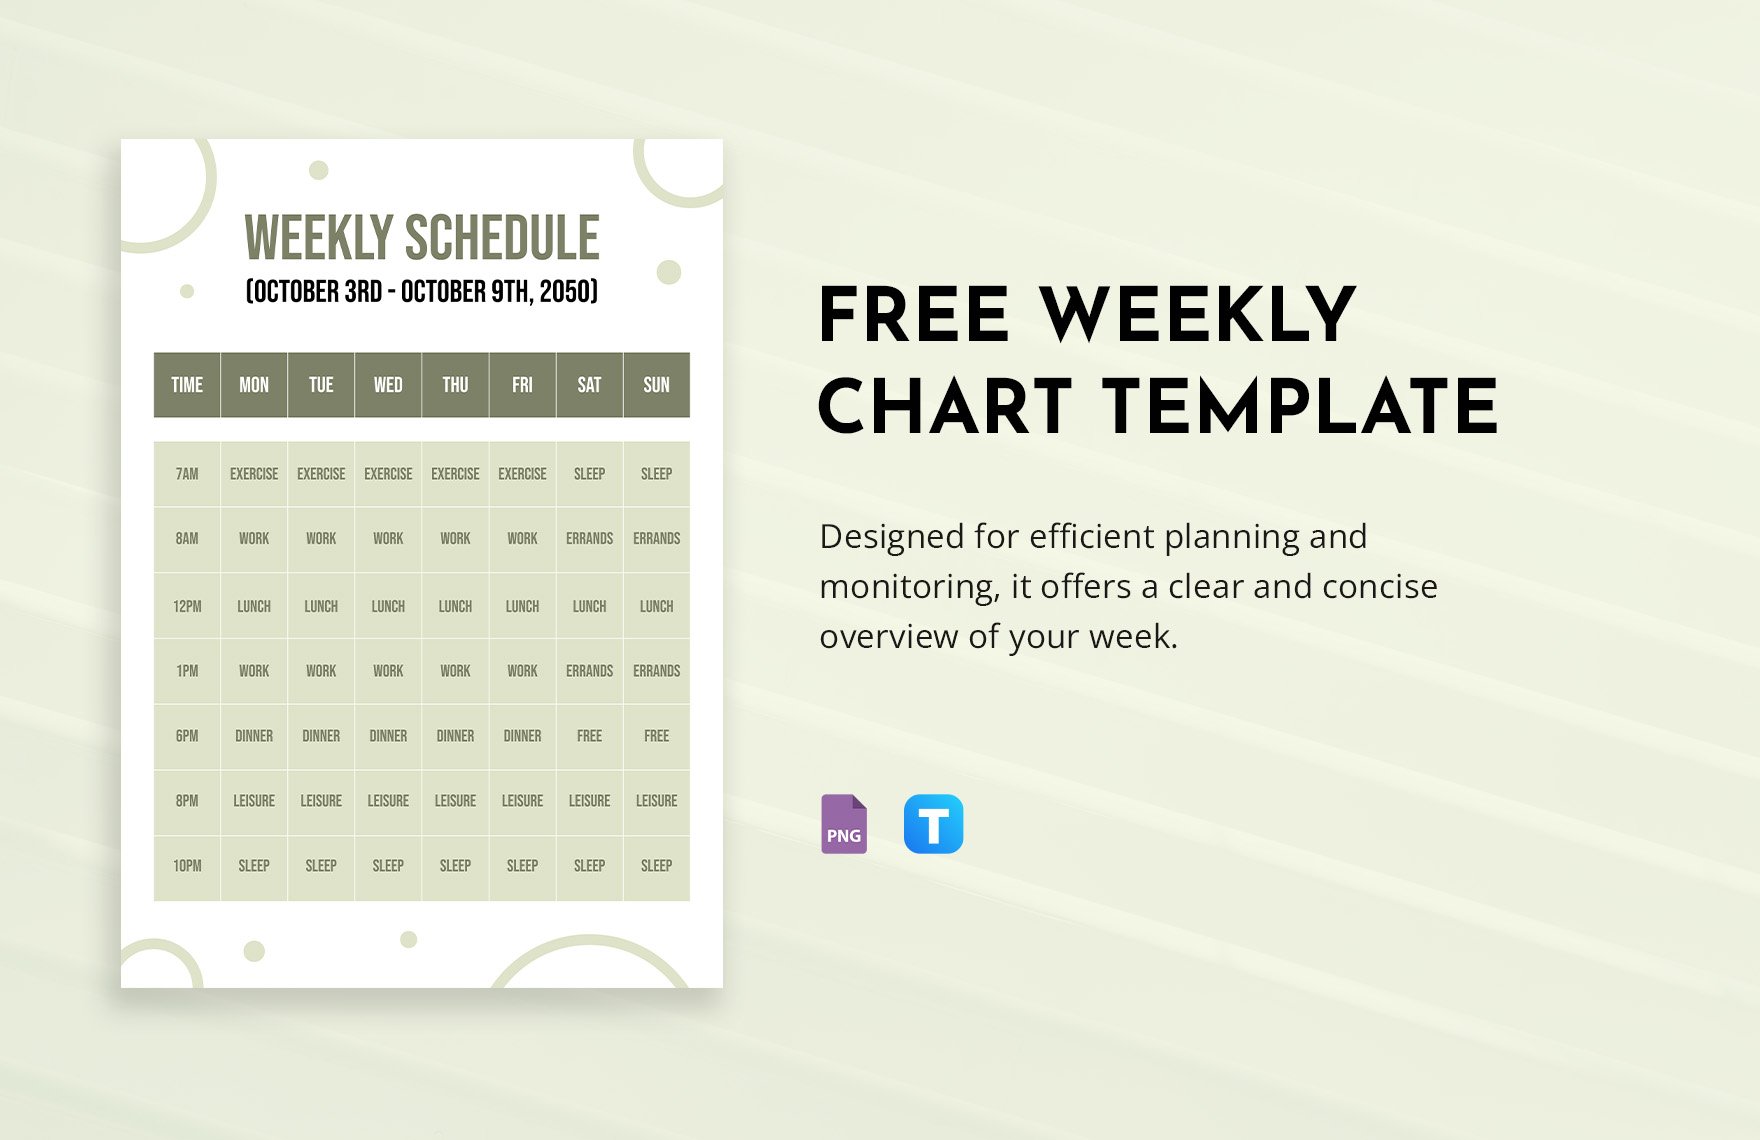 Free Weekly Chart Template in PNG